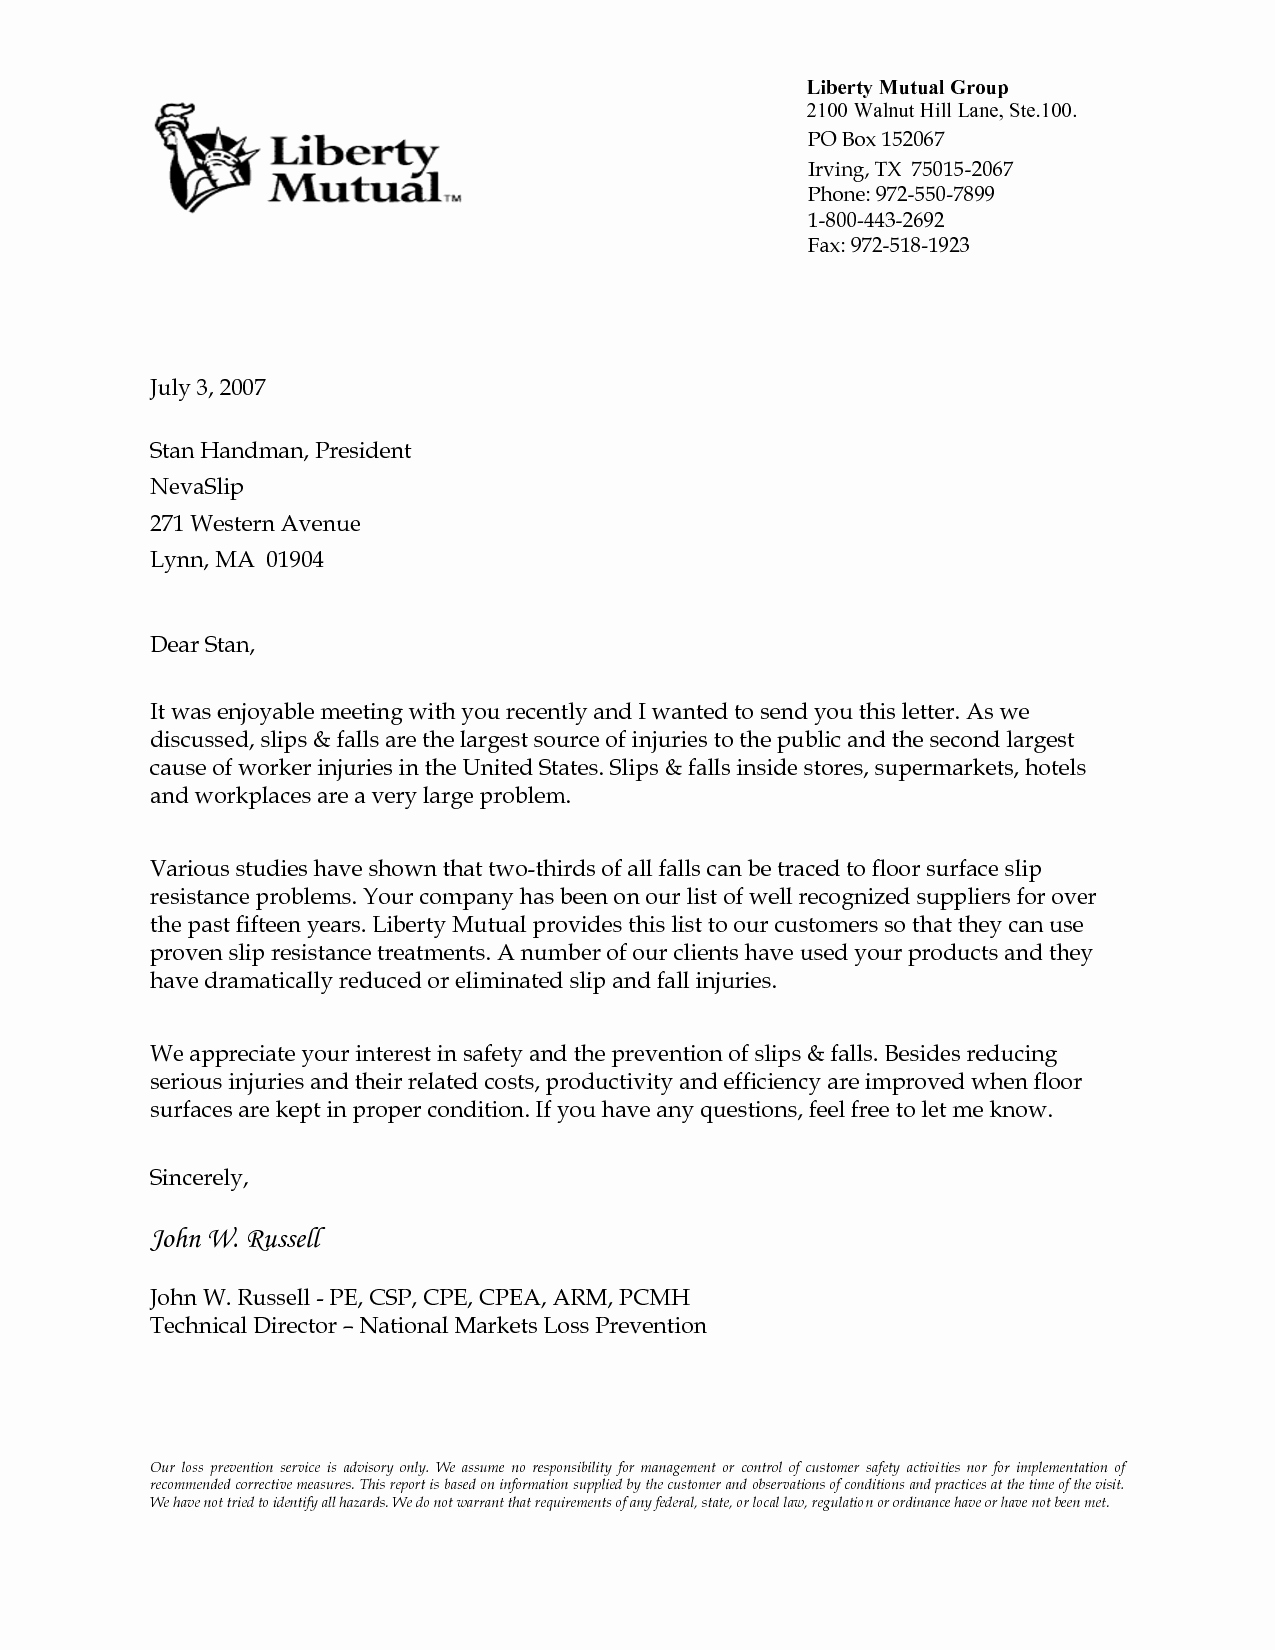 Template Of A Business Letter Fresh Business Letter Template